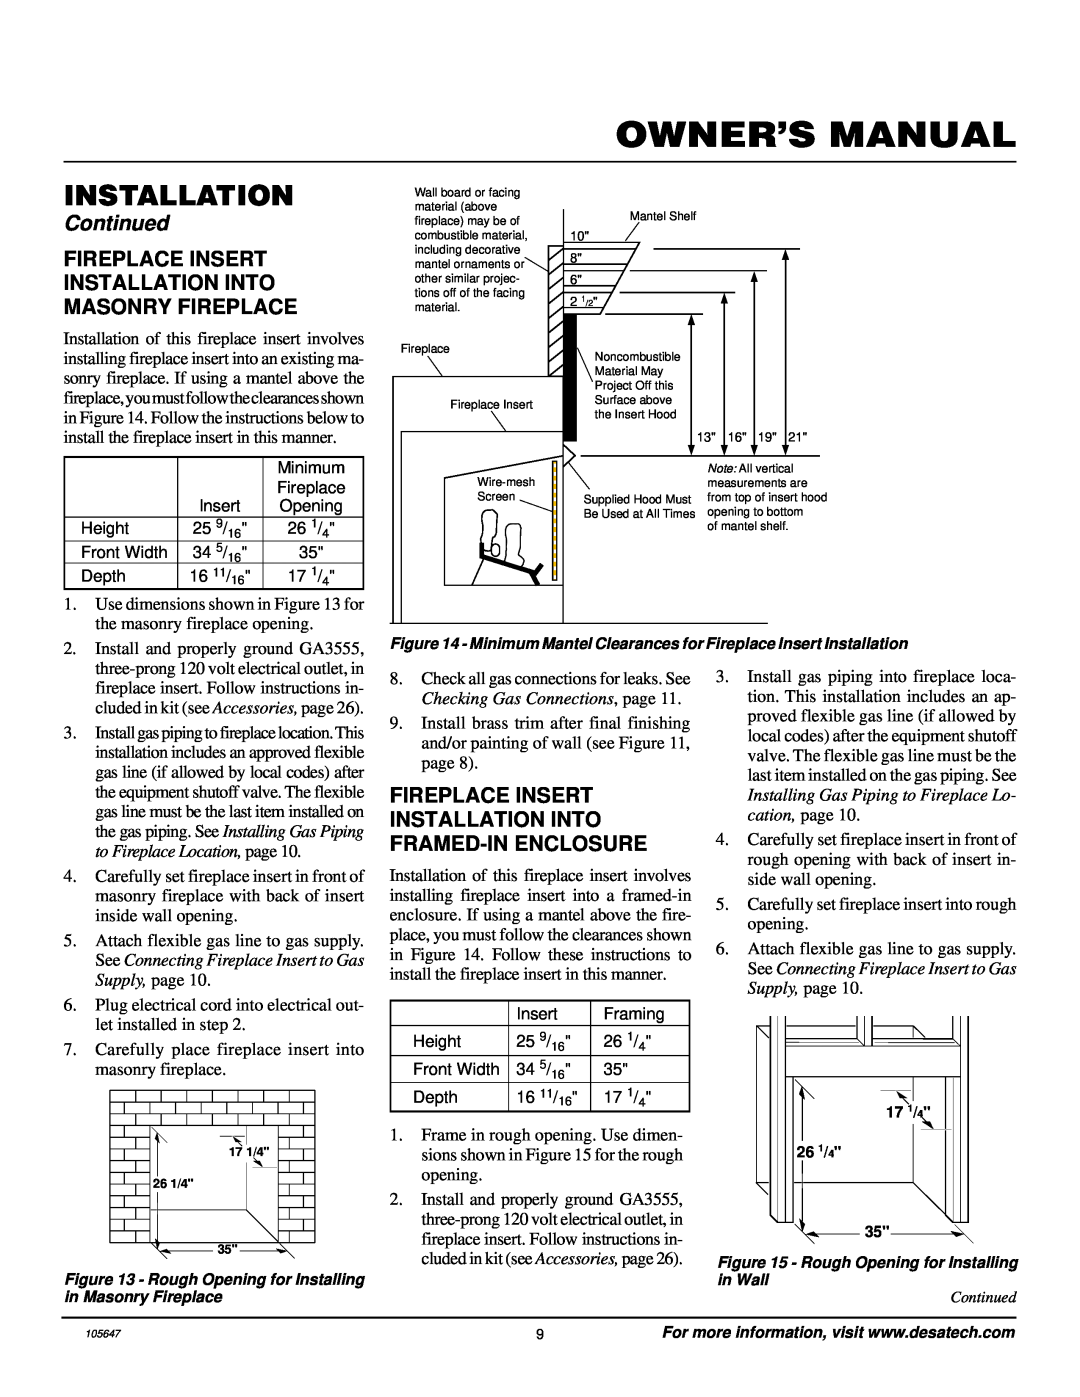 Desa VI33NR installation manual Owner’S Manual, Installation, Continued, the masonry fireplace opening 